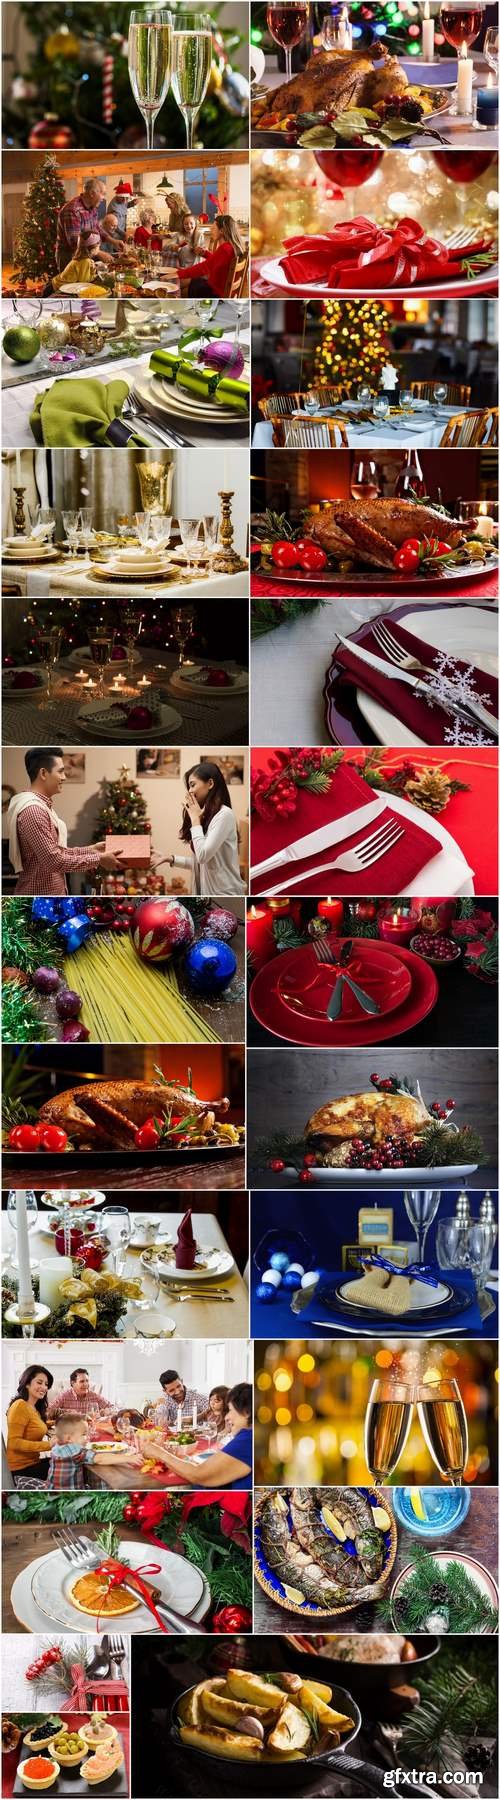 Holiday dinner family New Year table setting banquet dish eating food cutlery 25 HQ Jpeg